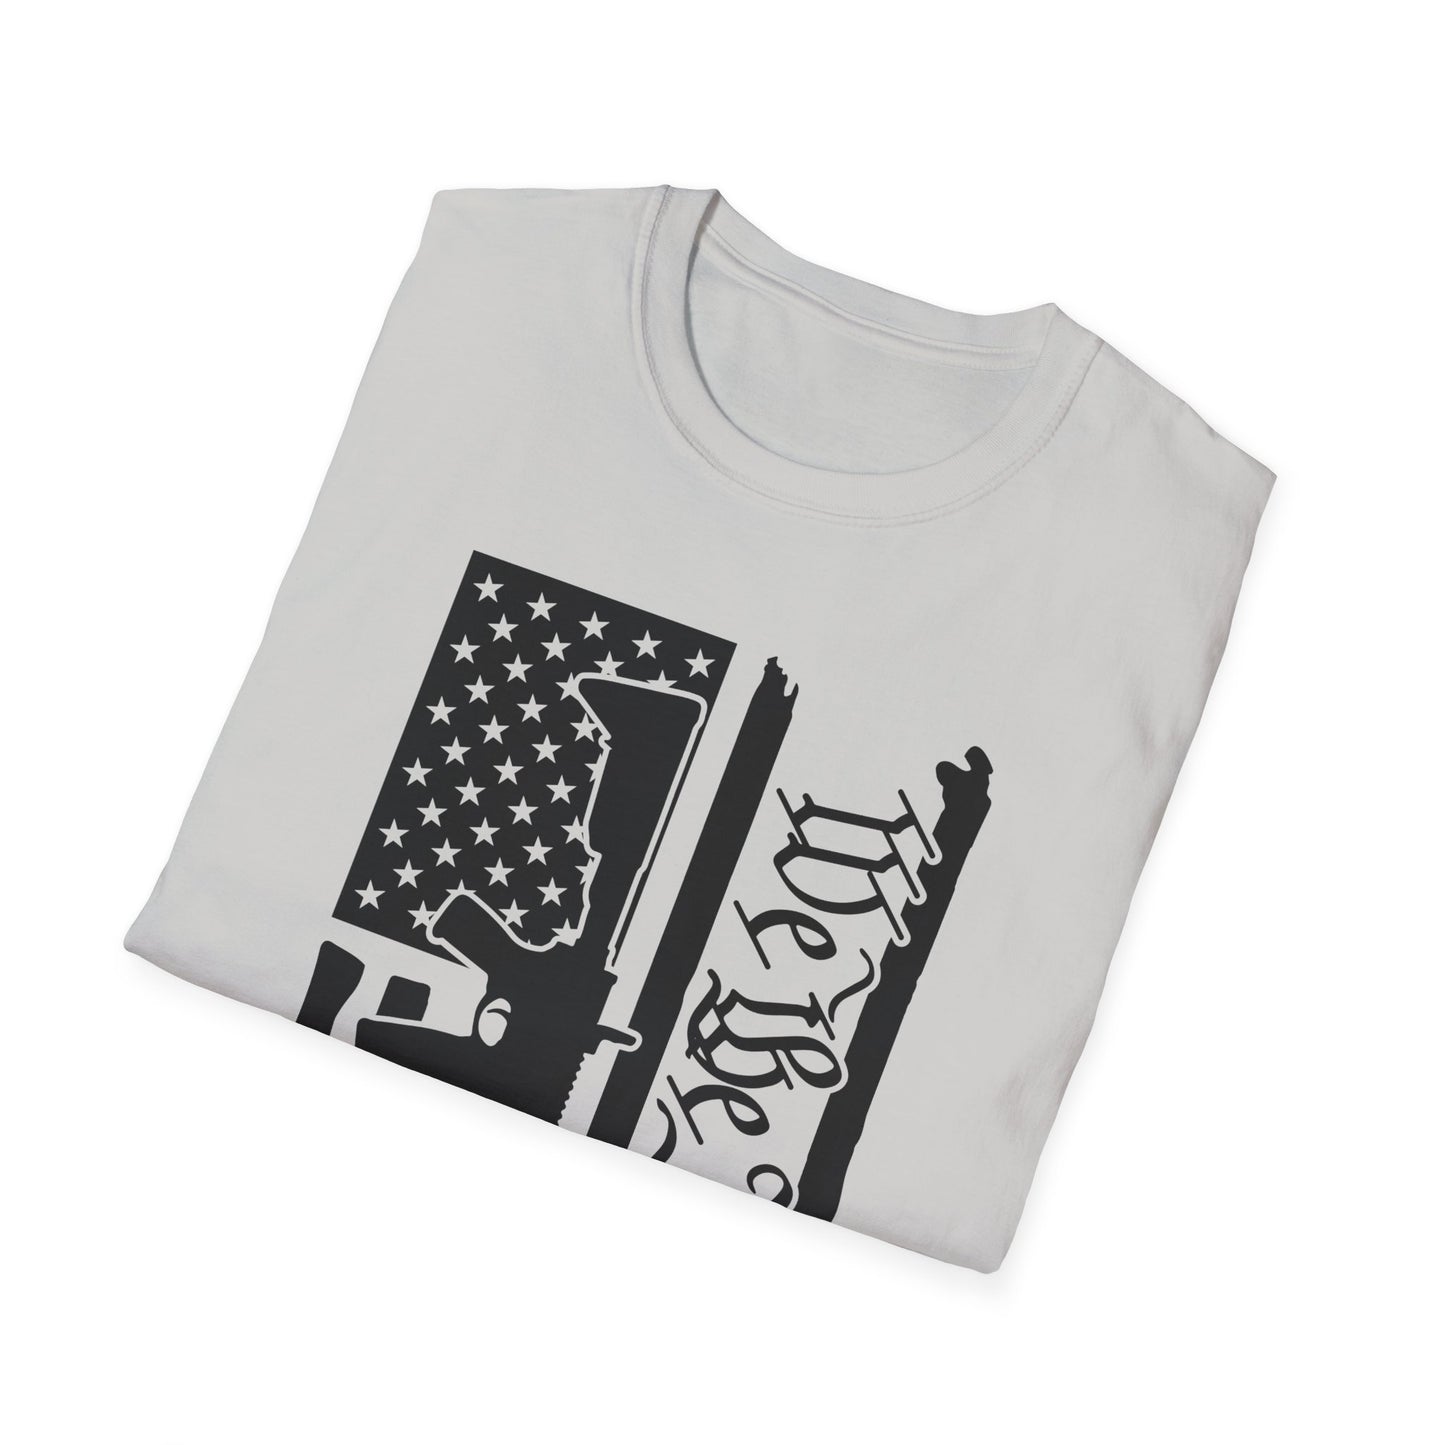 Distressed Vertical American Flag B&W - We The People - Unisex Softstyle T-Shirt